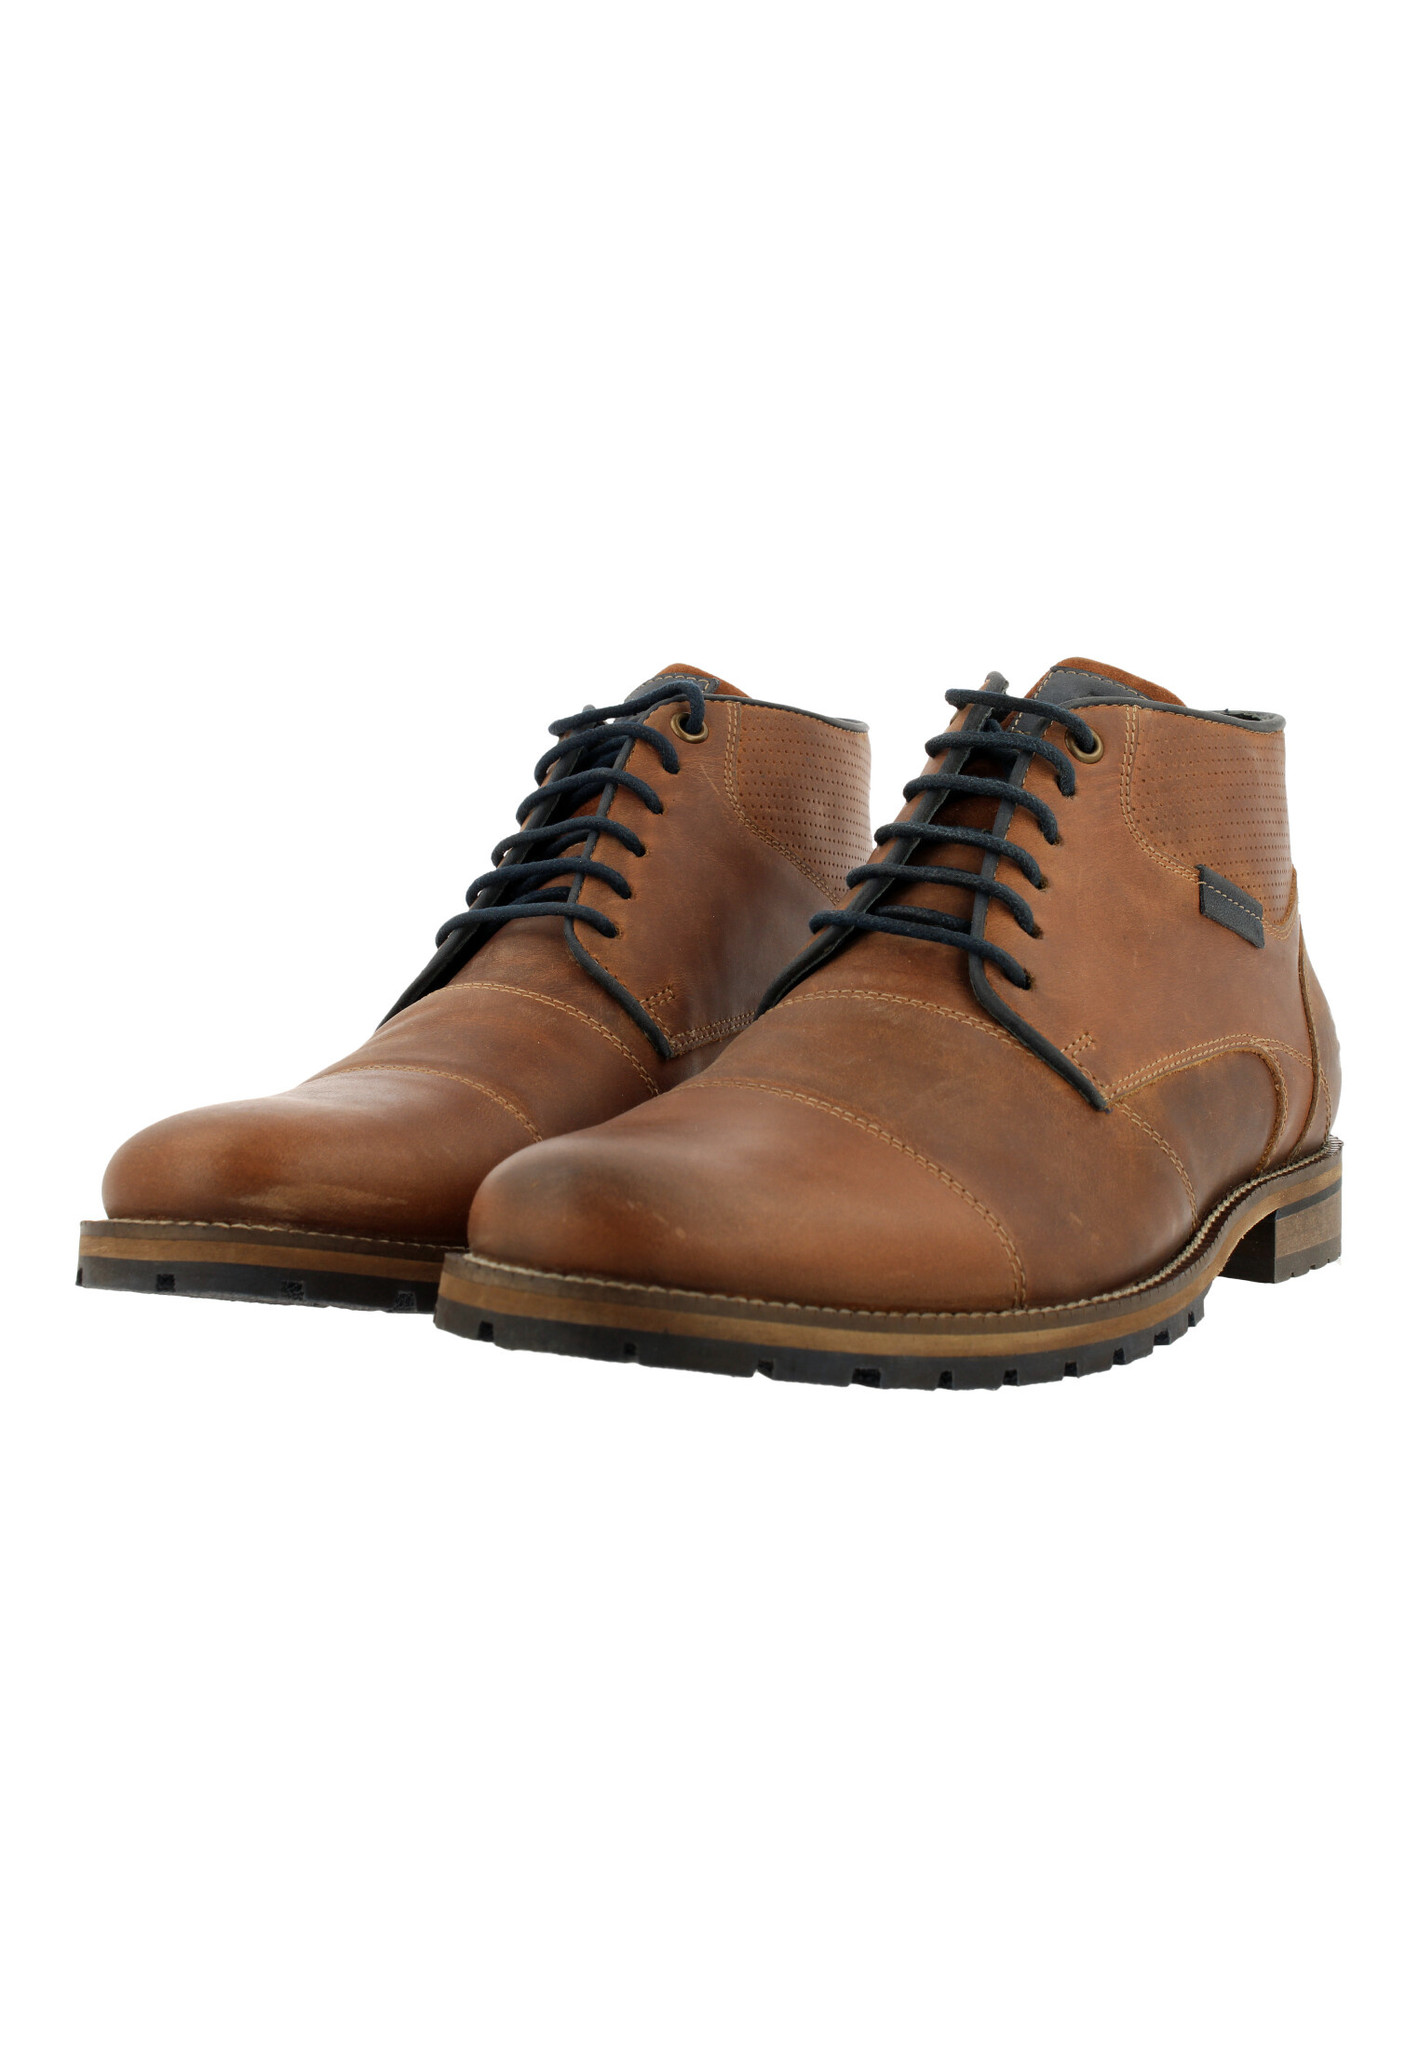 Bullboxer Ankle boots Tan/ Cognac 773I56284BLICOSU